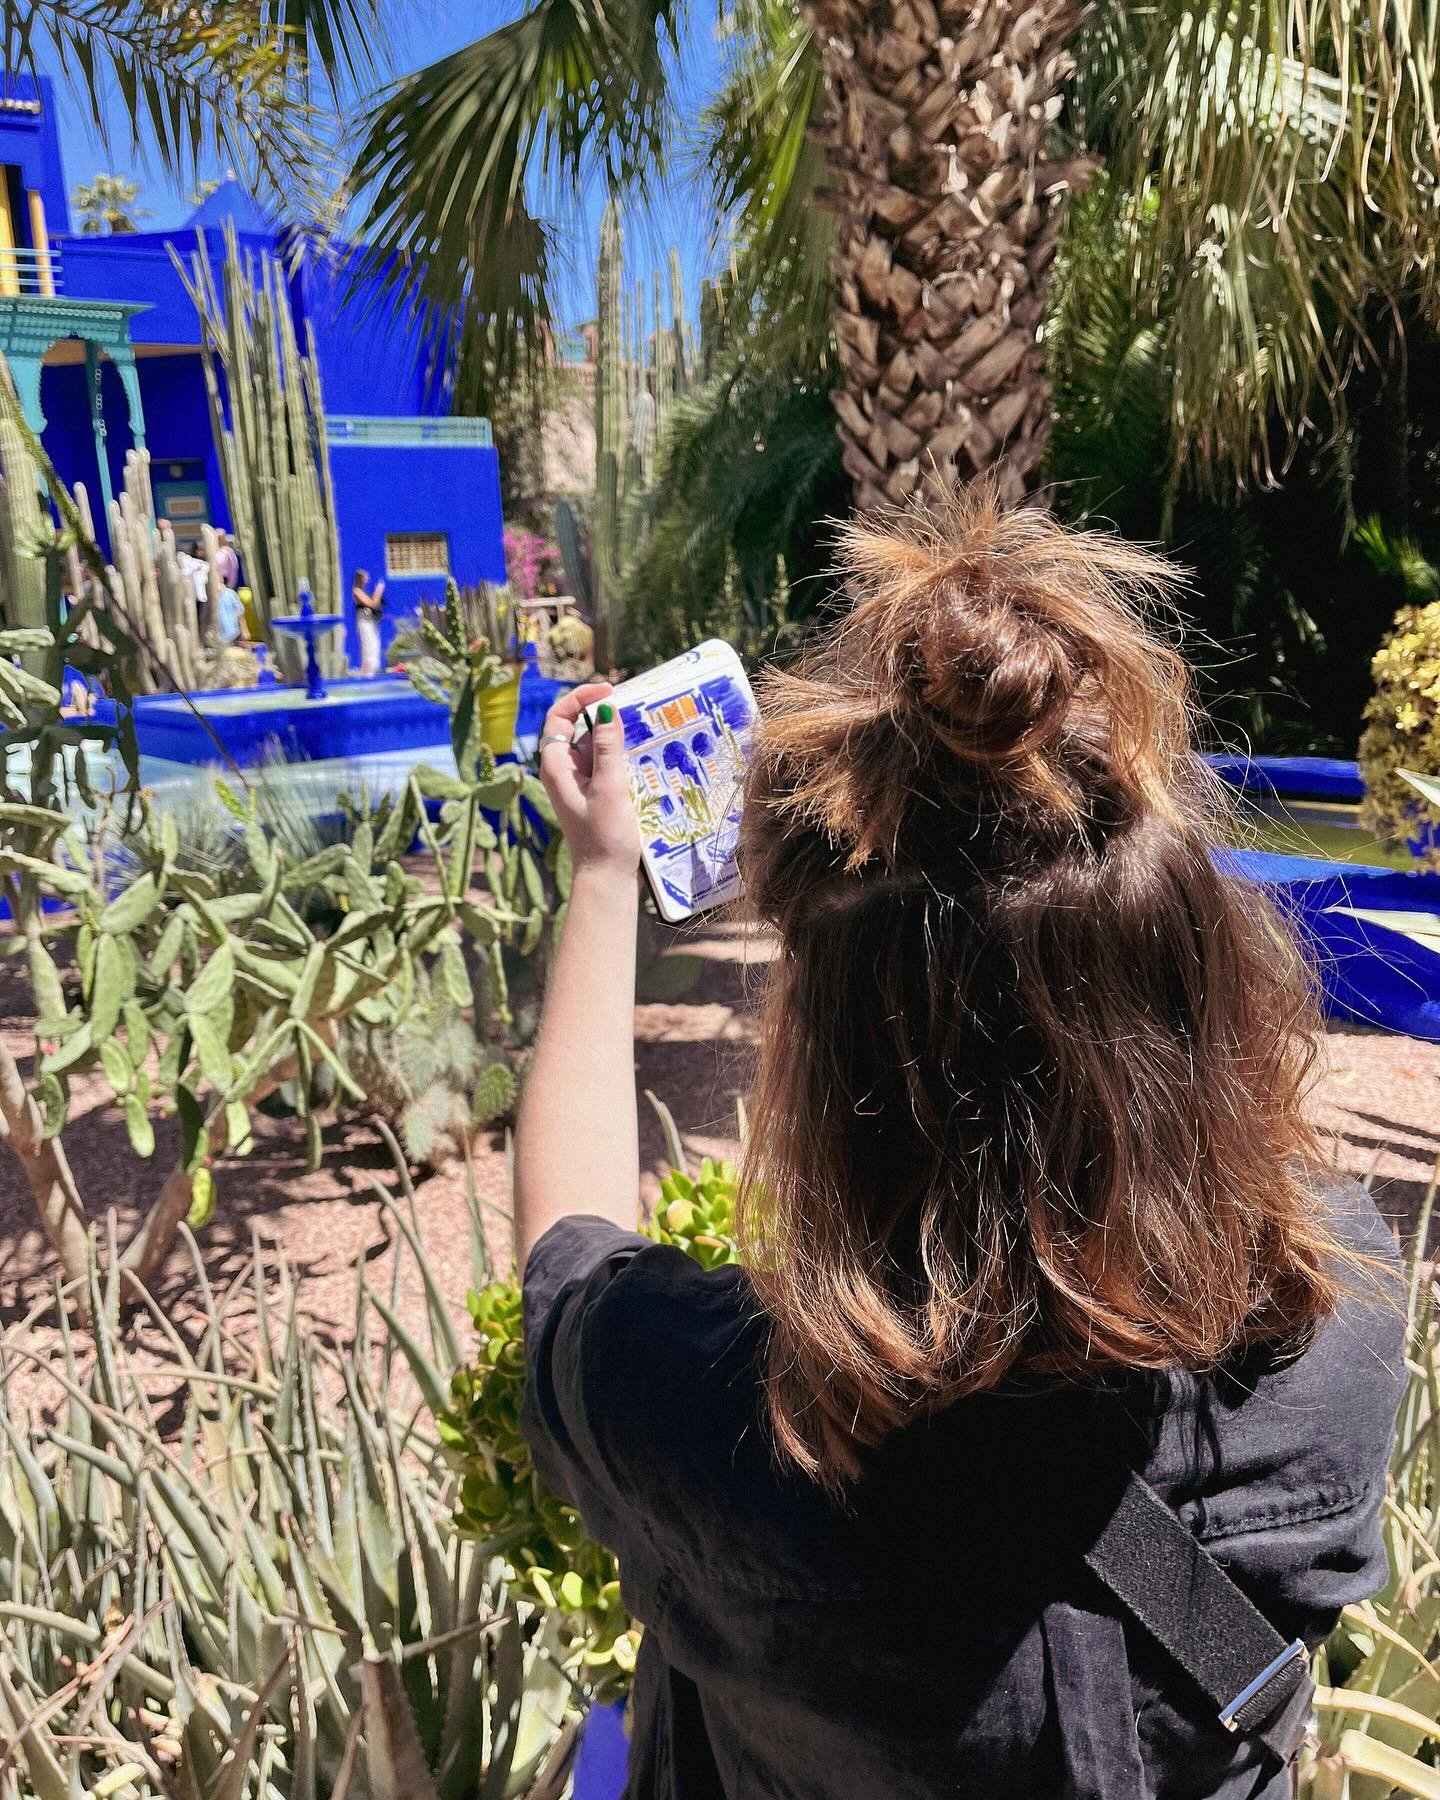 Ah Morocco you did not disappoint, lovely few days in the bustle of Marrakech. Completely forgot how hectic it is but found calm at the Majorelle. Such a dream to be amongst the blue in the sun, and have returned feeling very inspired 🌞💙

Took the 